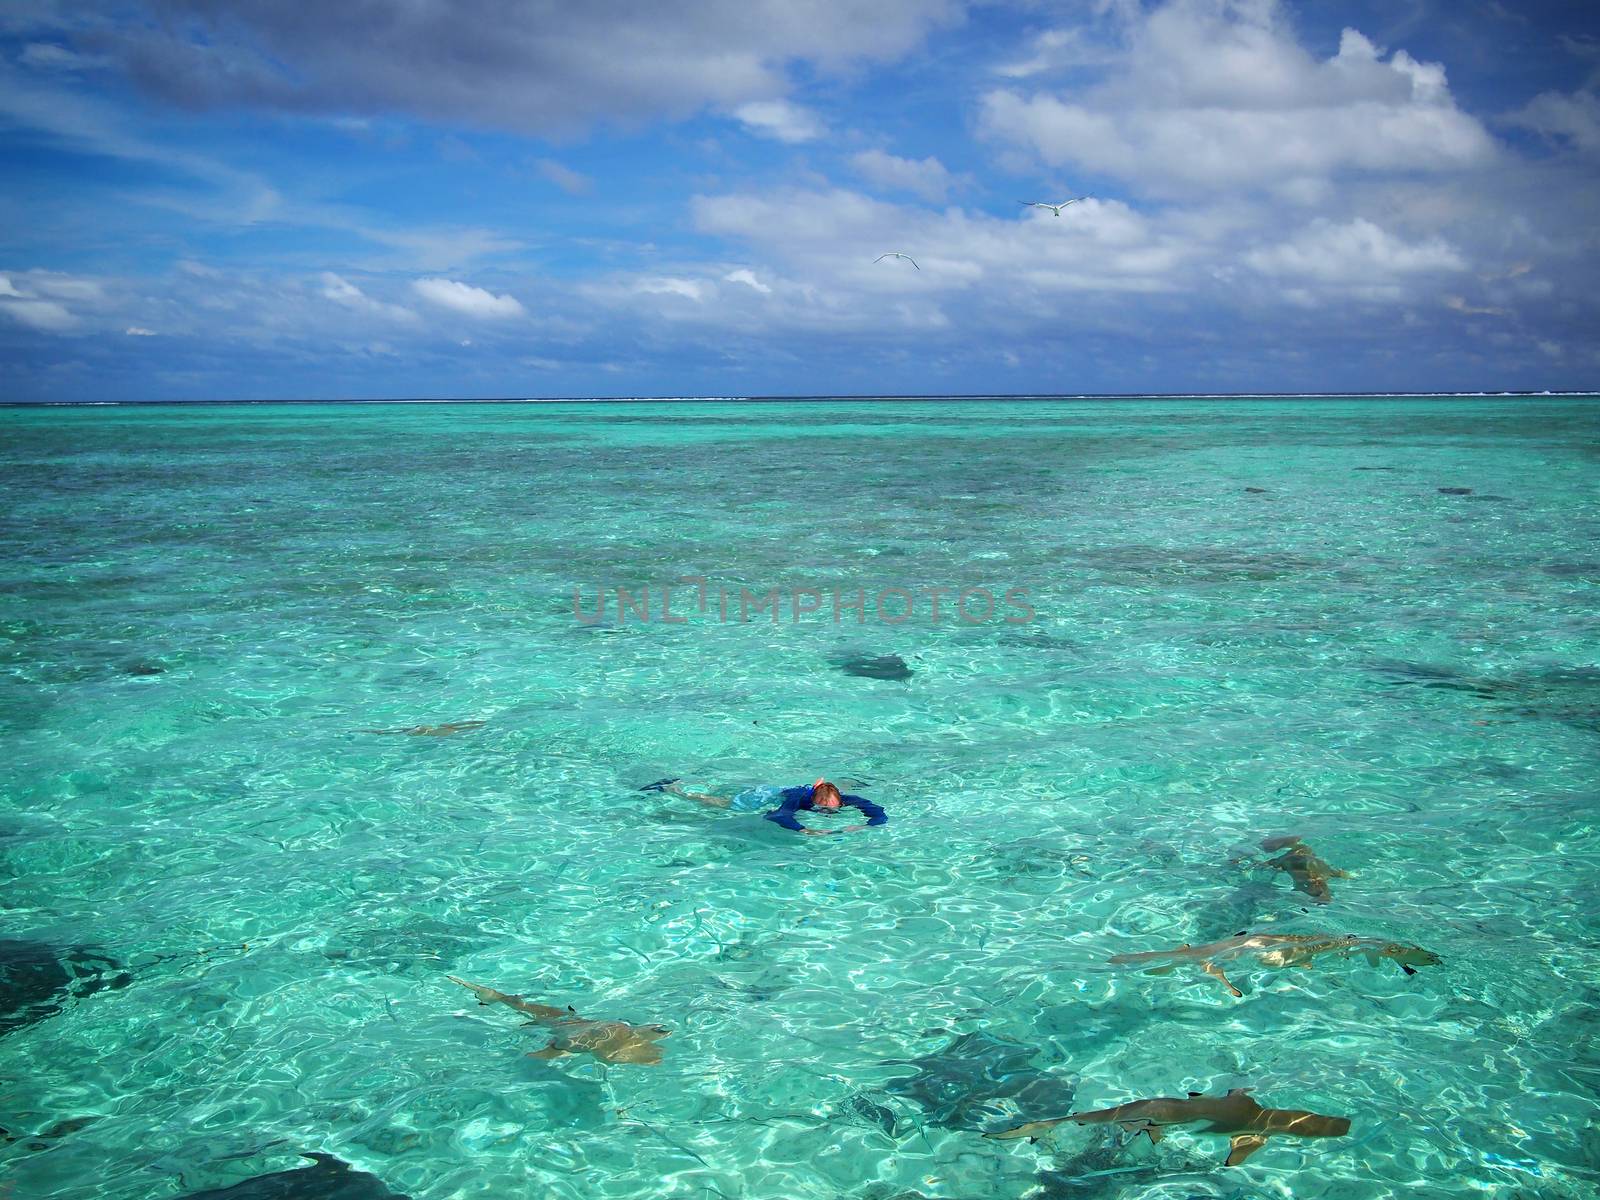 A tourist in sun protective swimwear photographing during snorkeling with sharks and stingrays in the shallow, clear water of the lagoon of Bora Bora, a tropical island in the Tahiti archipelago French Polynesia in the Pacific Ocean.